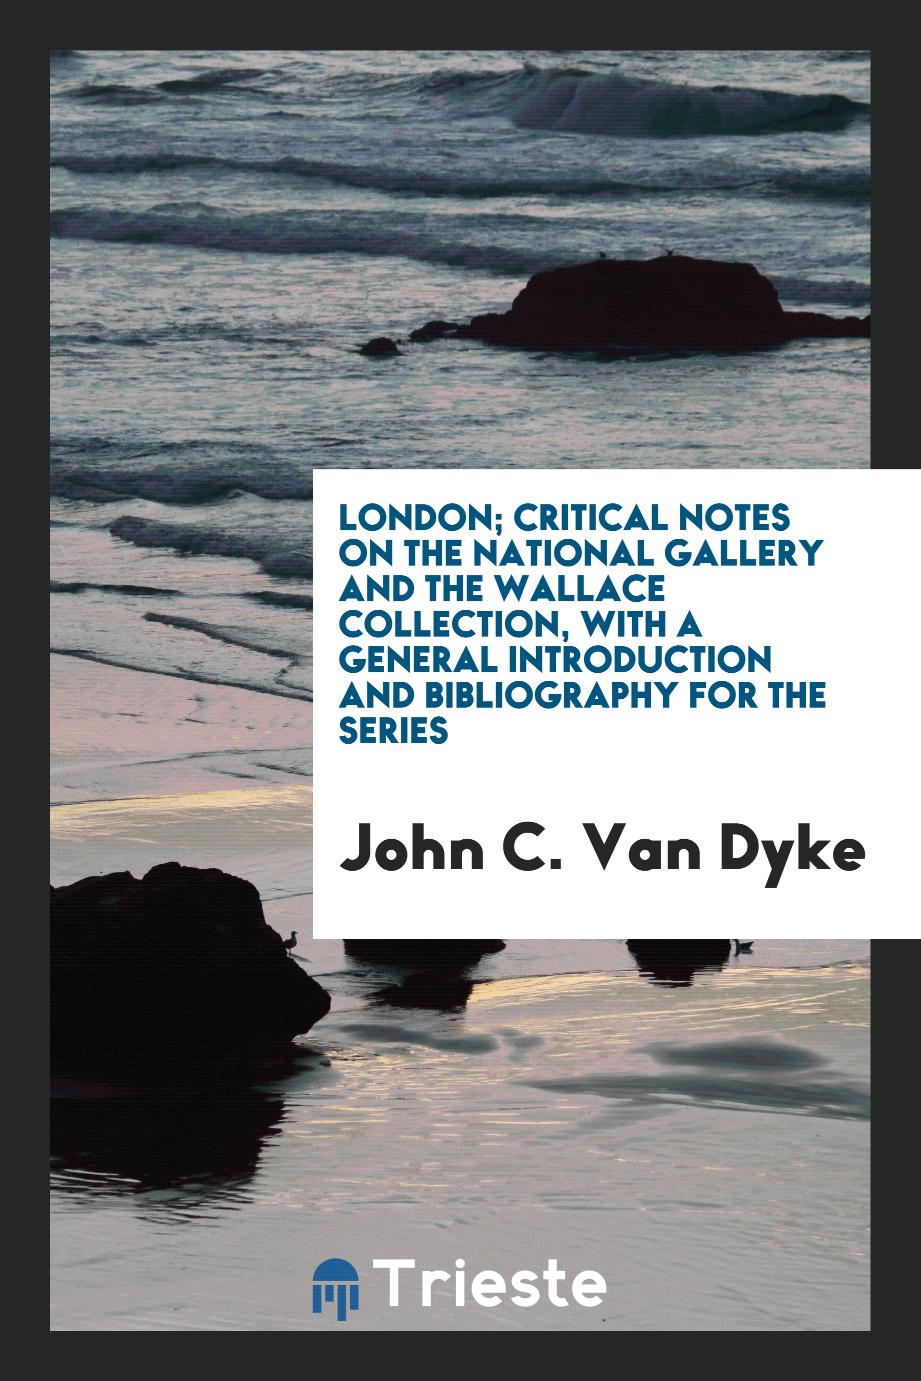 London; critical notes on the National Gallery and the Wallace Collection, with a general introduction and bibliography for the series